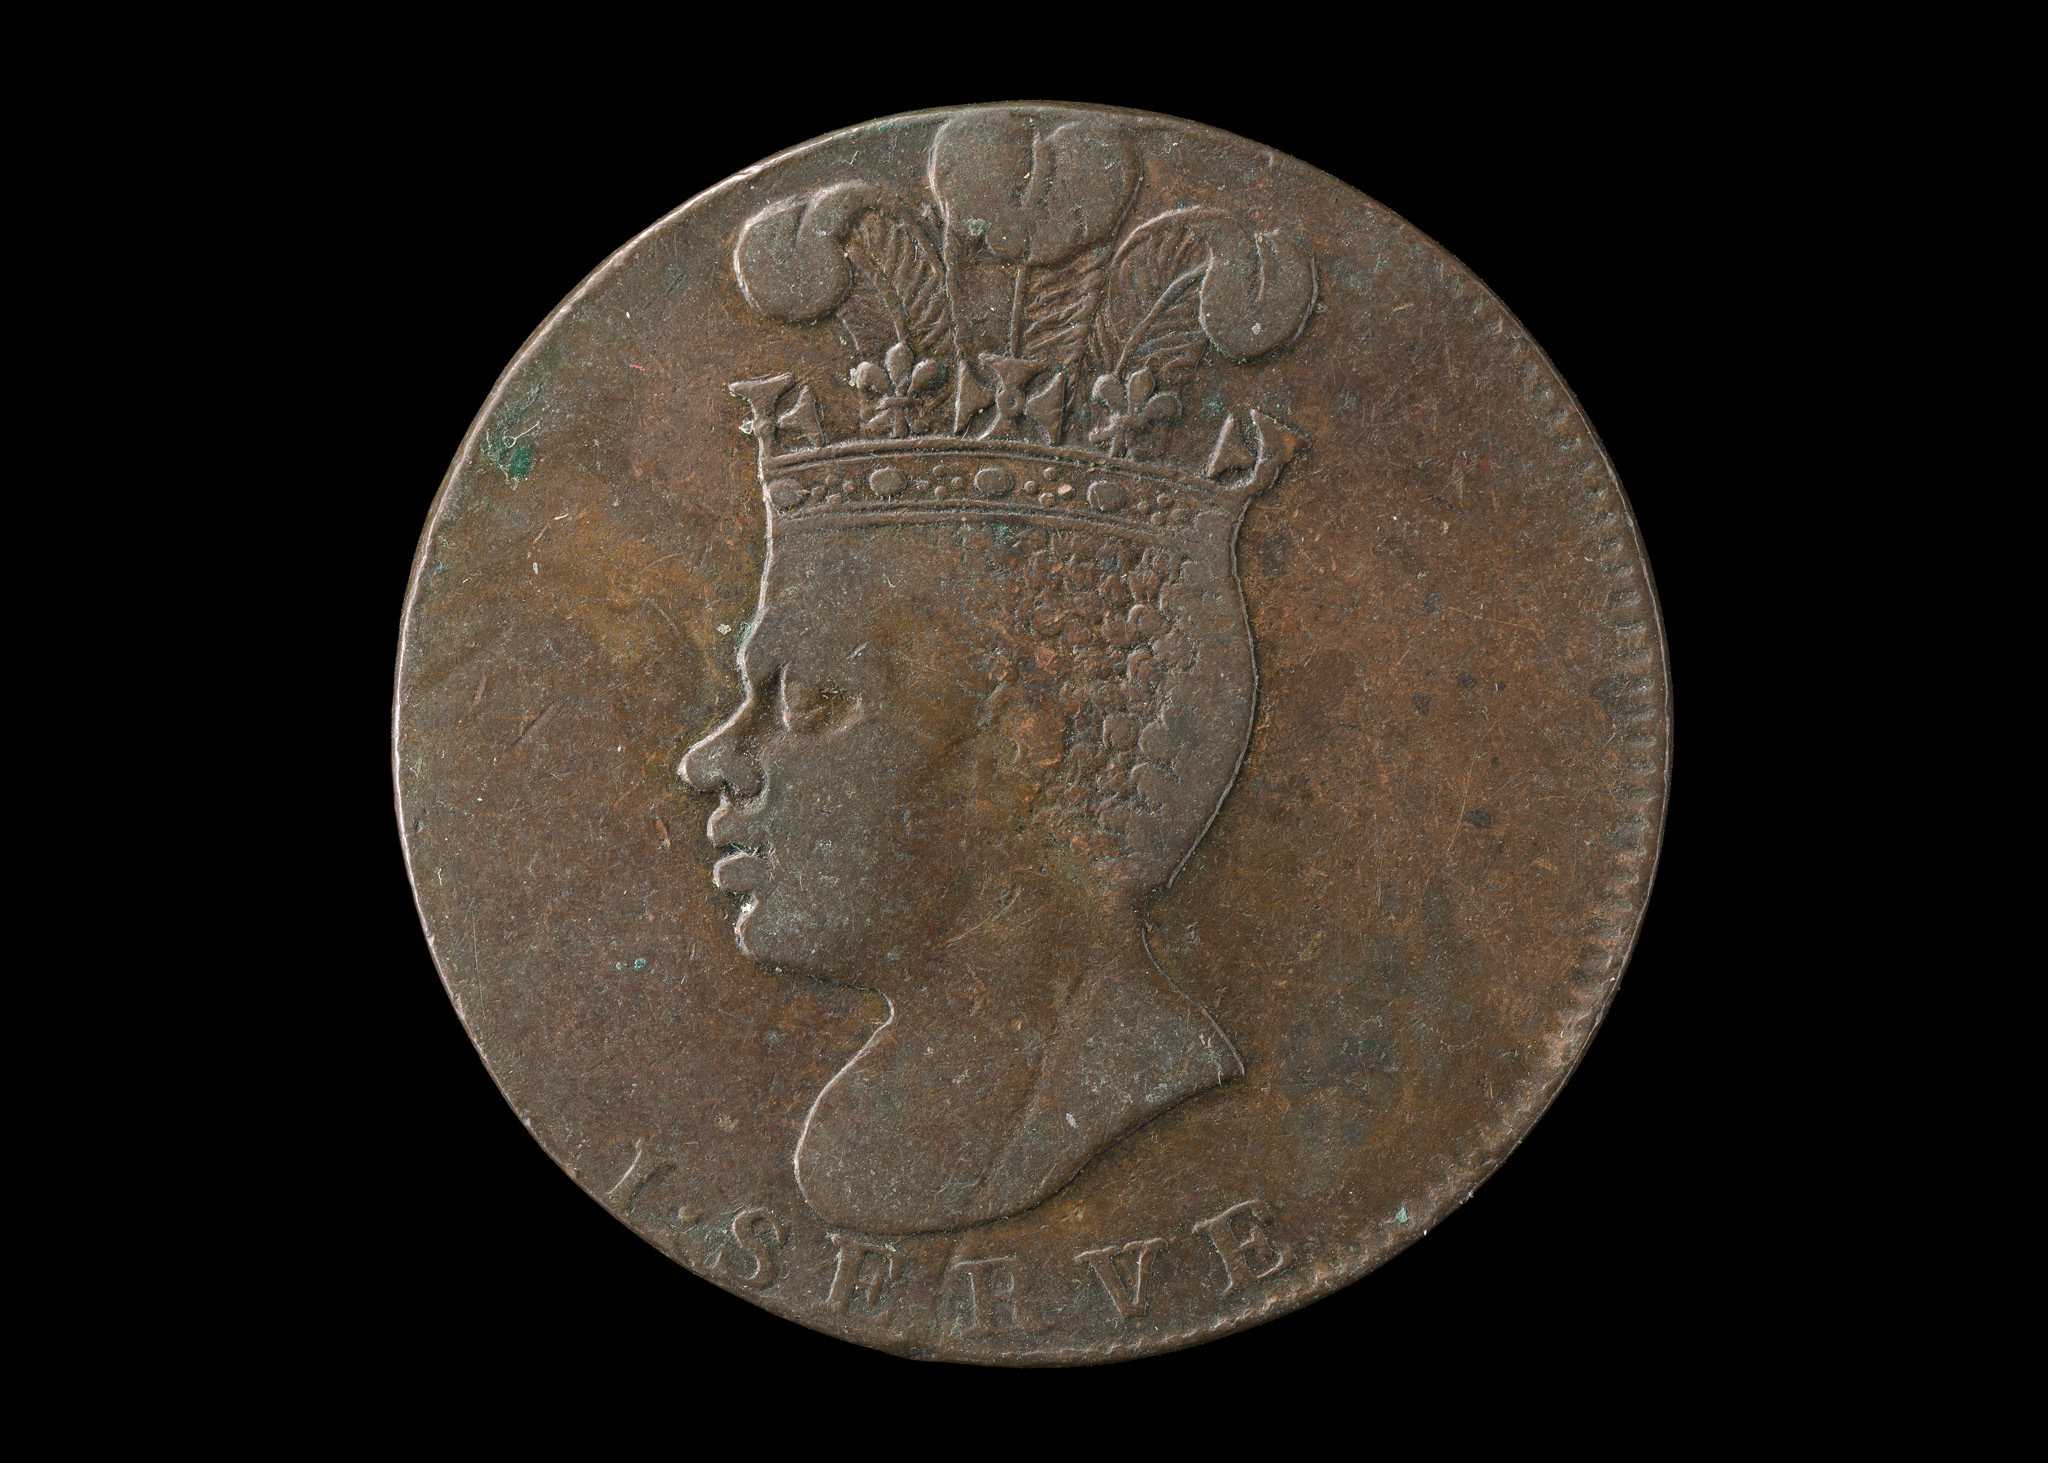 Barbados penny from 1788. One side of the coin shows an African figure in profile wearing a plumed crown with [I ∙ SERVE] at the bottom. The other side depicts a large pineapple. Around the border [BARBADOES [sic] ∙ PENNY ∙ 1788] is in raised relief. The coin is tarnished and shows wear.